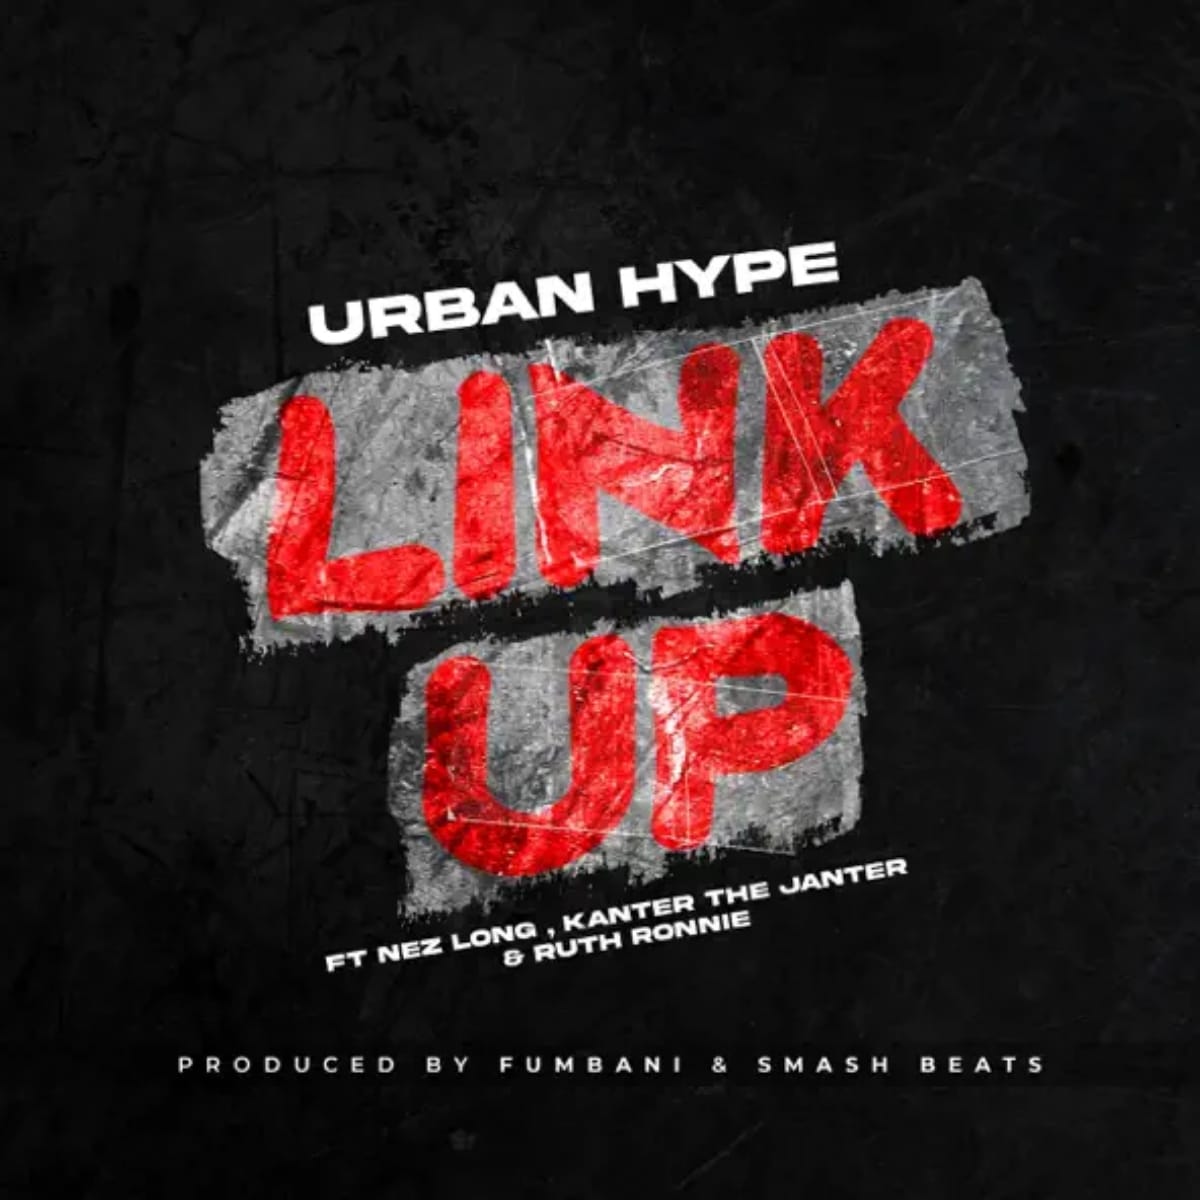 DOWNLOAD: Urban Hype Ft. Nez Long, Kanter The Janter & Ruth Ronnie – “Link Up” Mp3